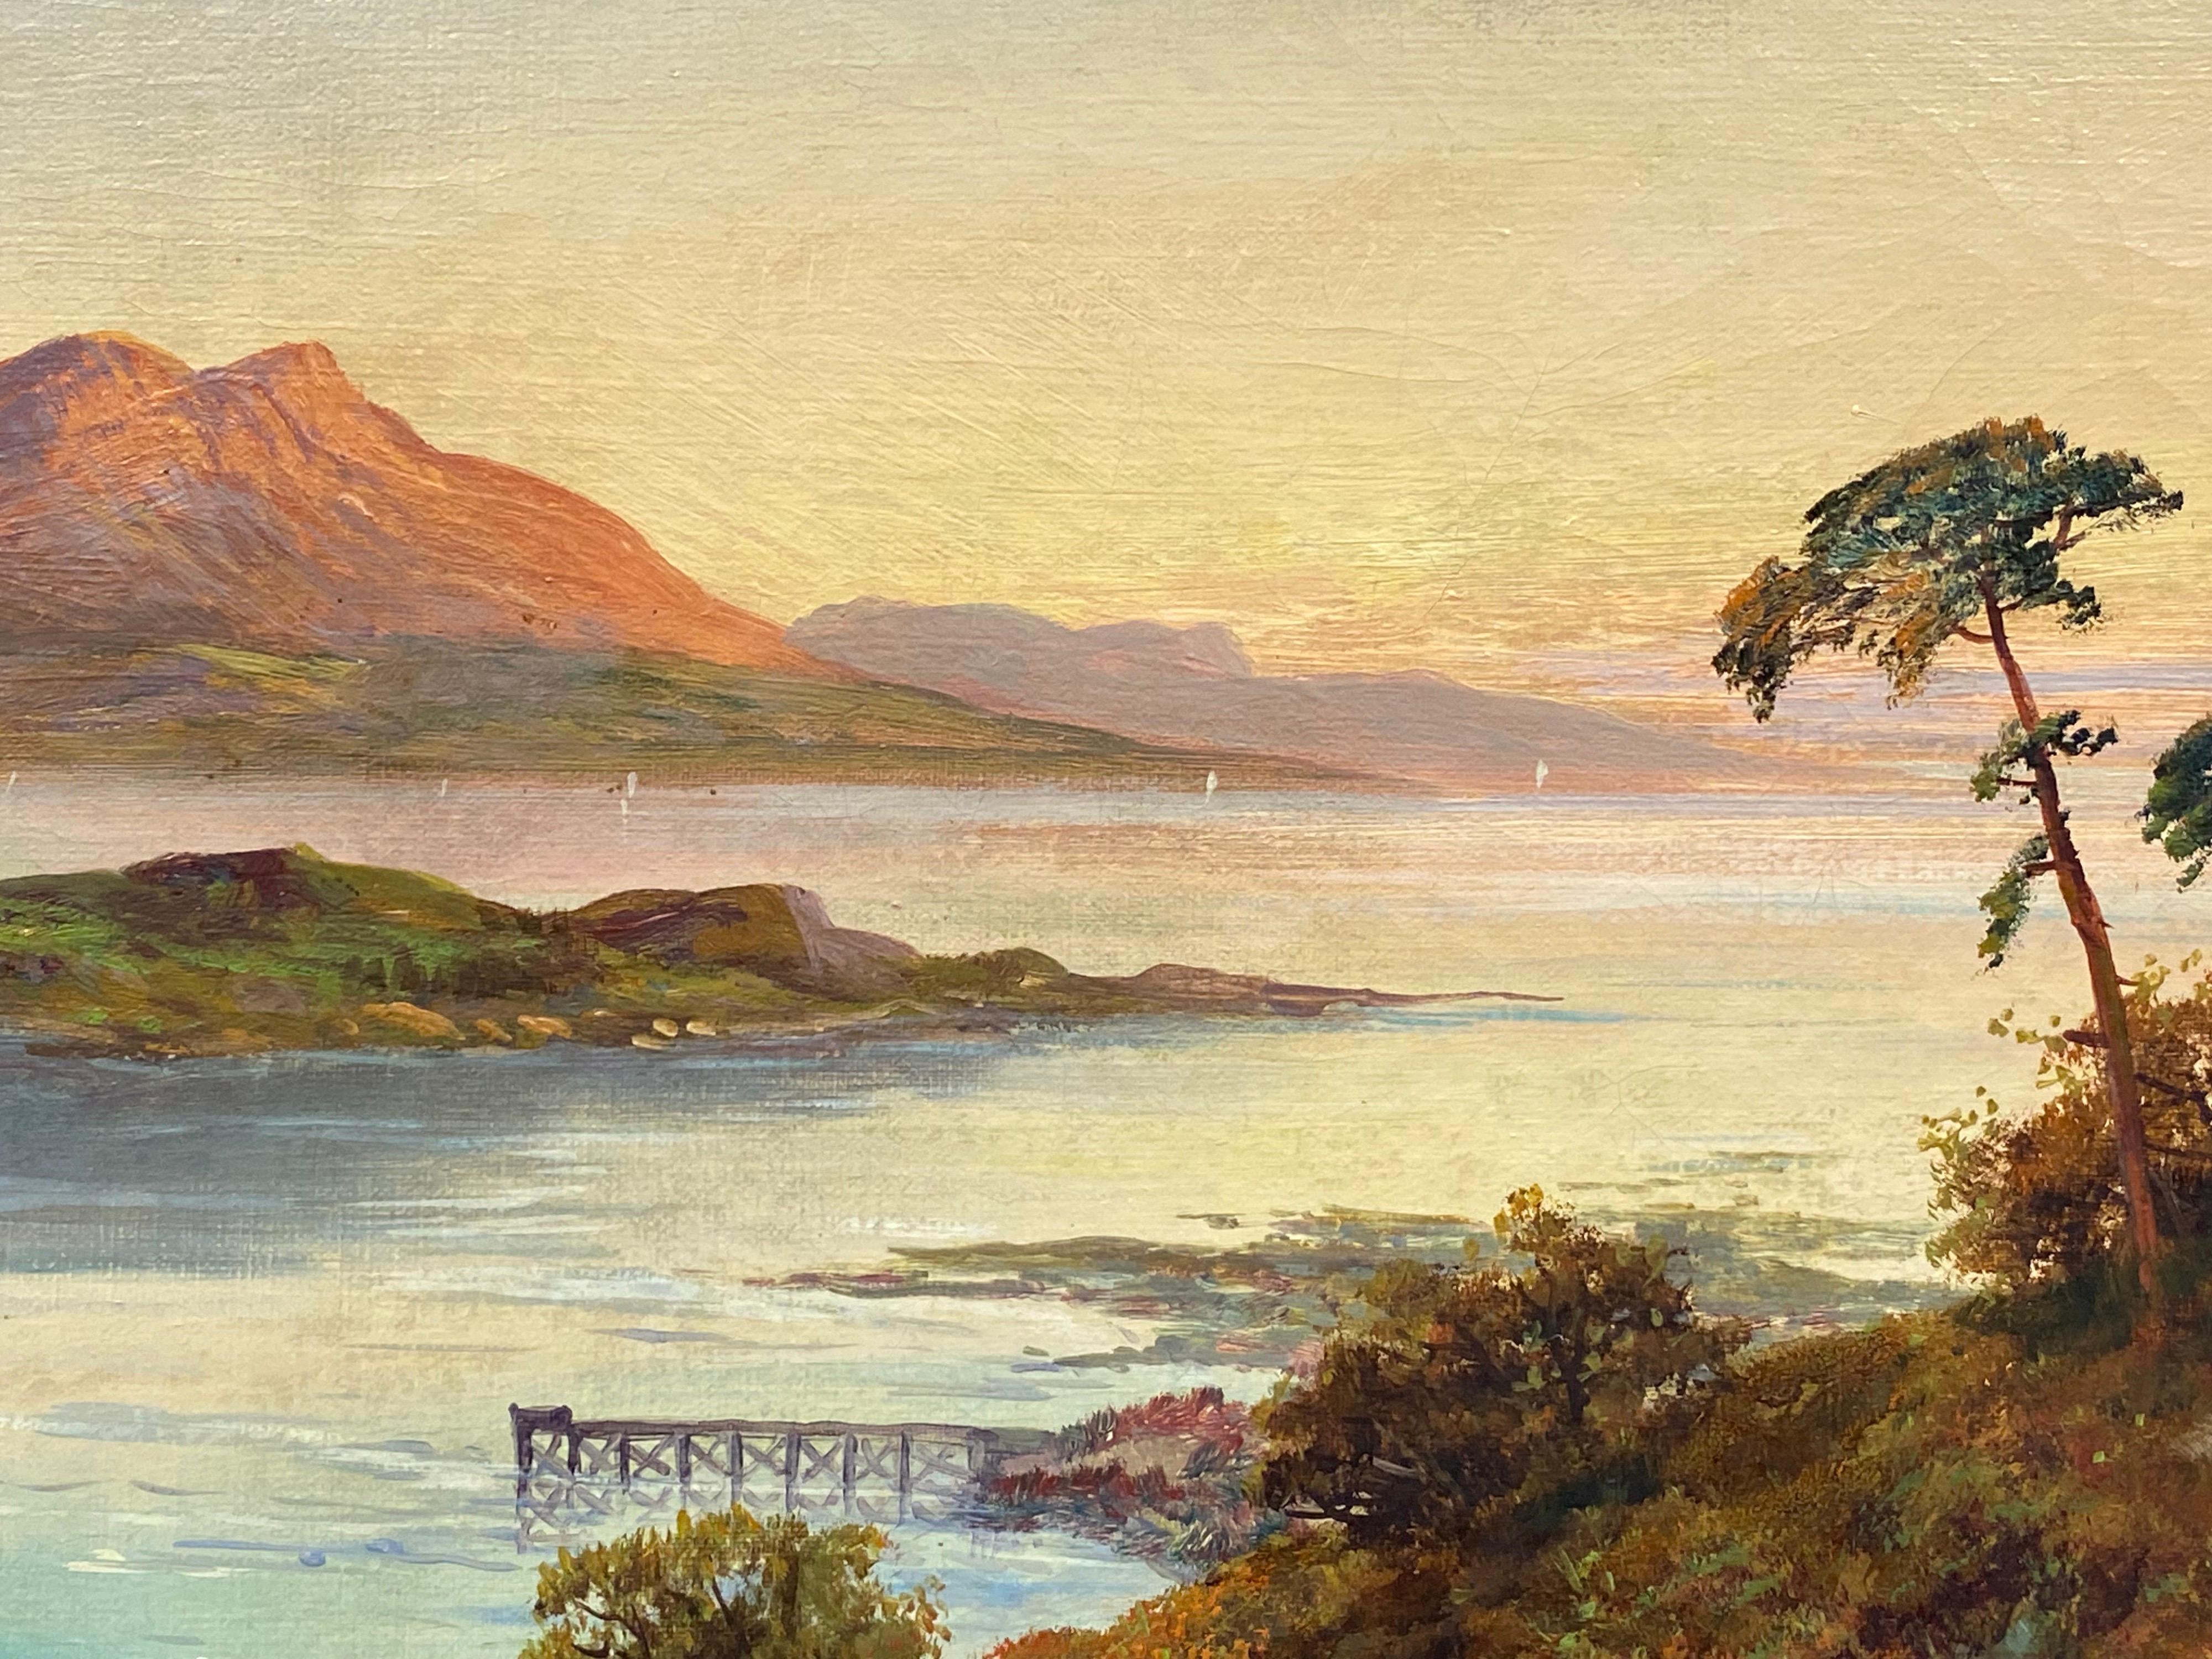 Antique Scottish Highlands Oil Painting Sunset over Loch Lomond, Luss - Beige Figurative Painting by Francis E. Jamieson